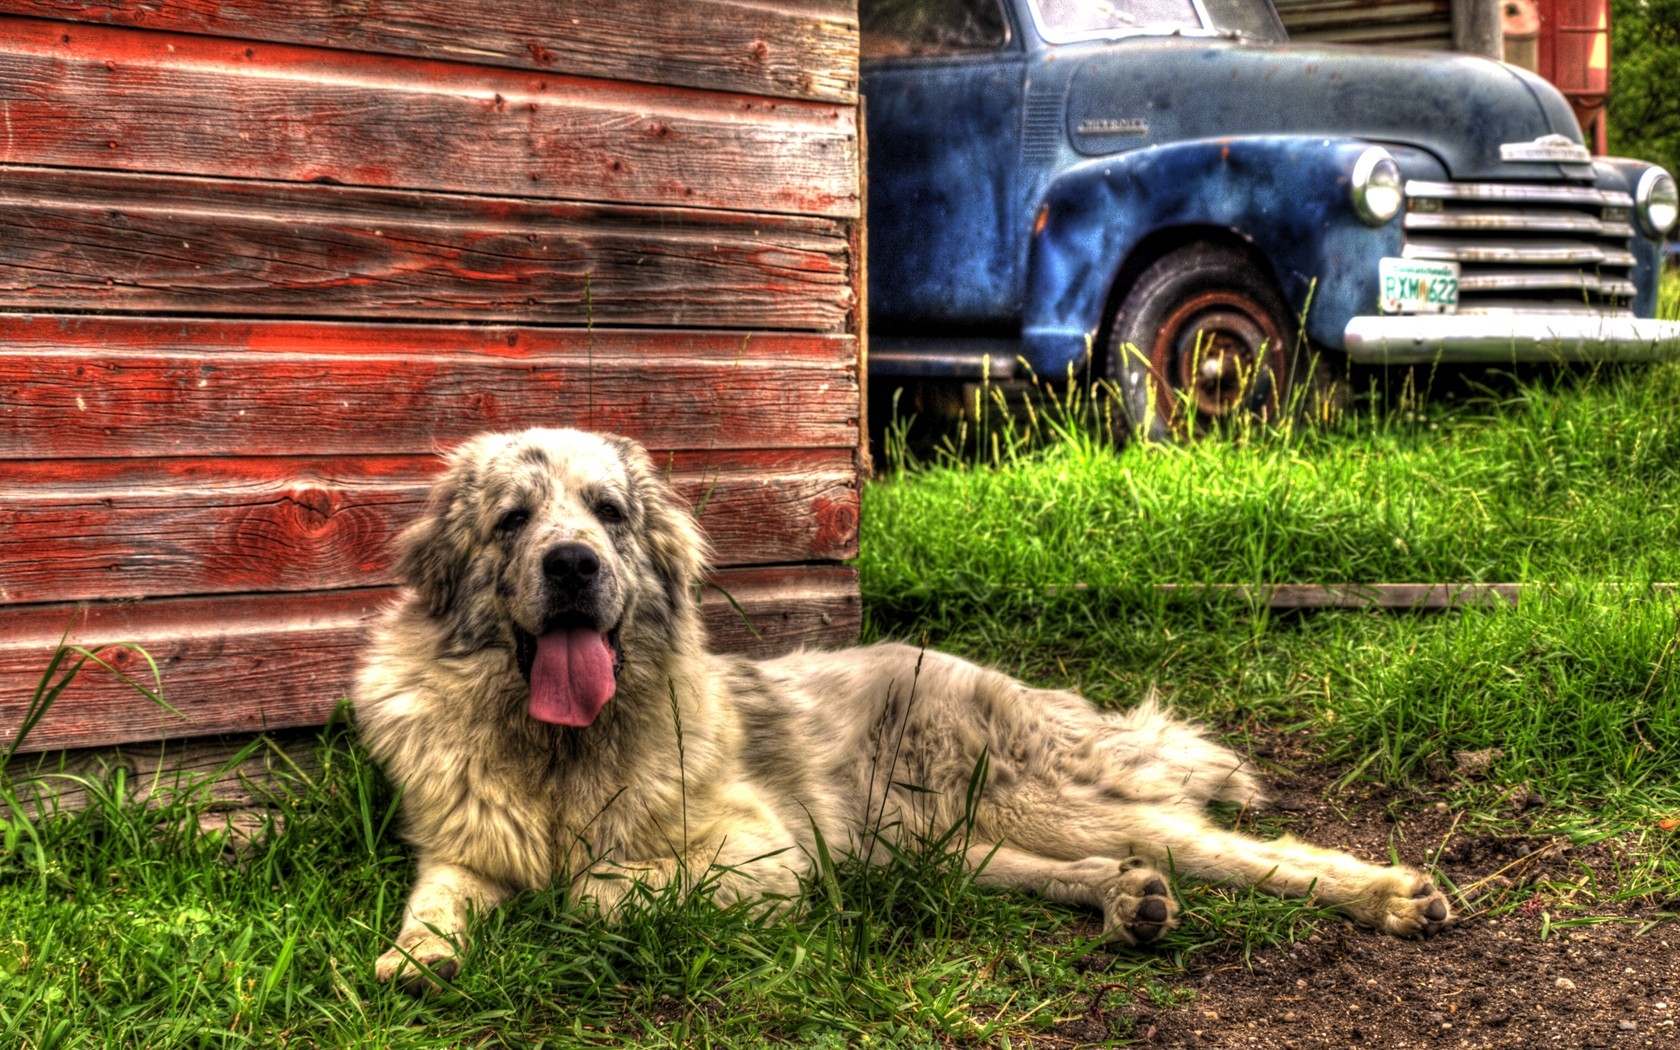 old grass dogs trucks hdr photography barn vibrant farm 1680x1050 wallpapers High Quality Wallpapers,High Definition Wallpapers